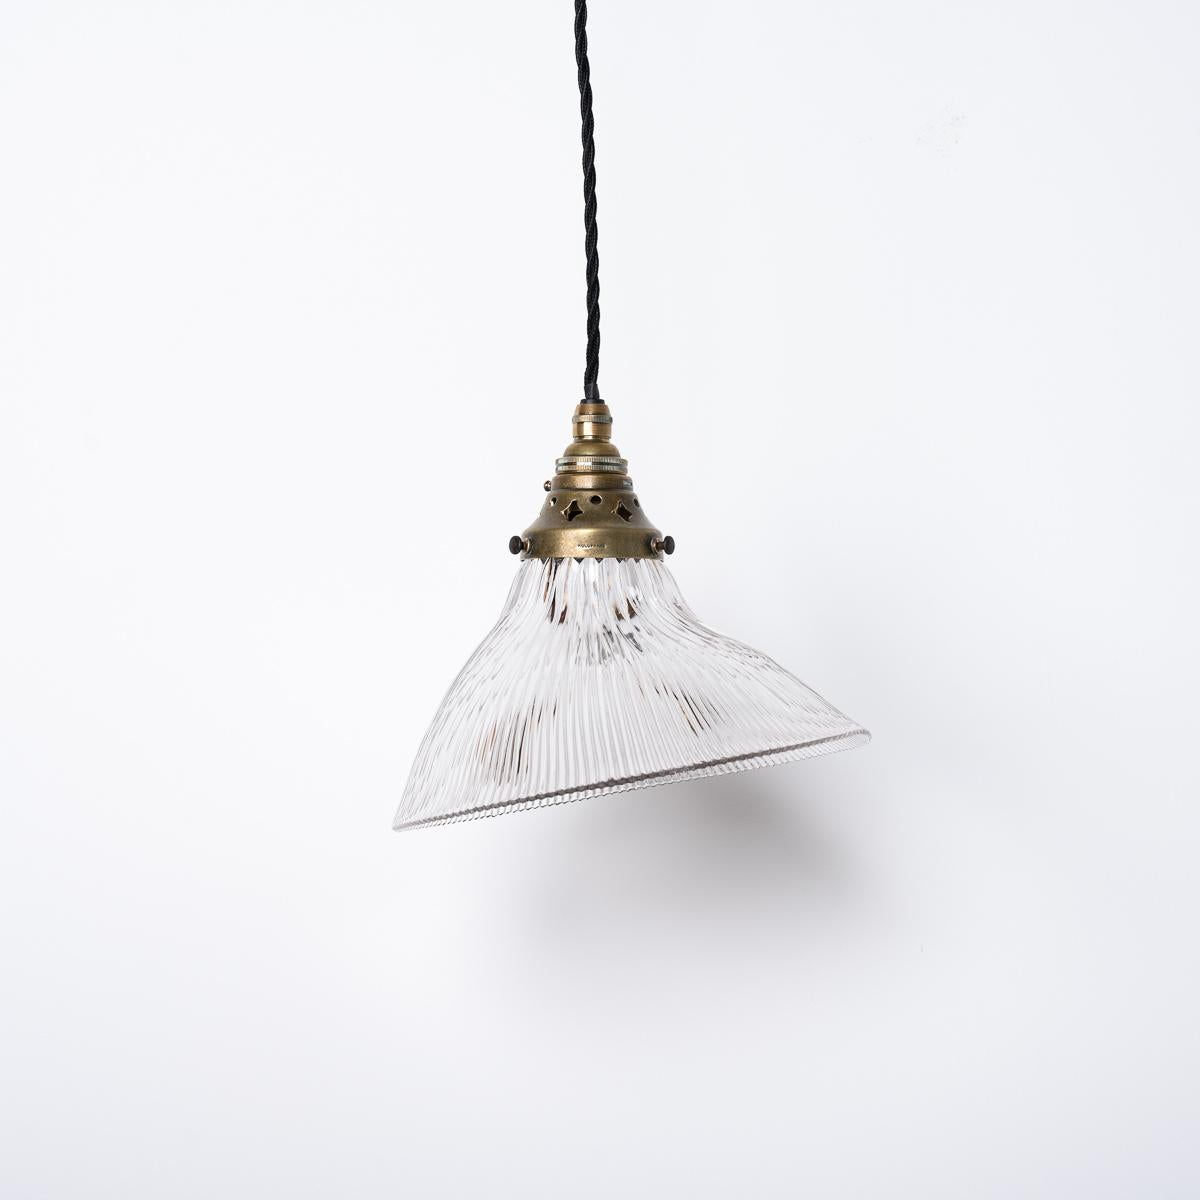 ANTIQUE ANGLED HOLOPHANE PRISMATIC GLASS PENDANT LIGHT


Attractive angled Holophane glass lights with original aged brass fittings.

Stamped Holophane galleries and prismatic glass shades also bearing the Holophane makers marks.

British made circa